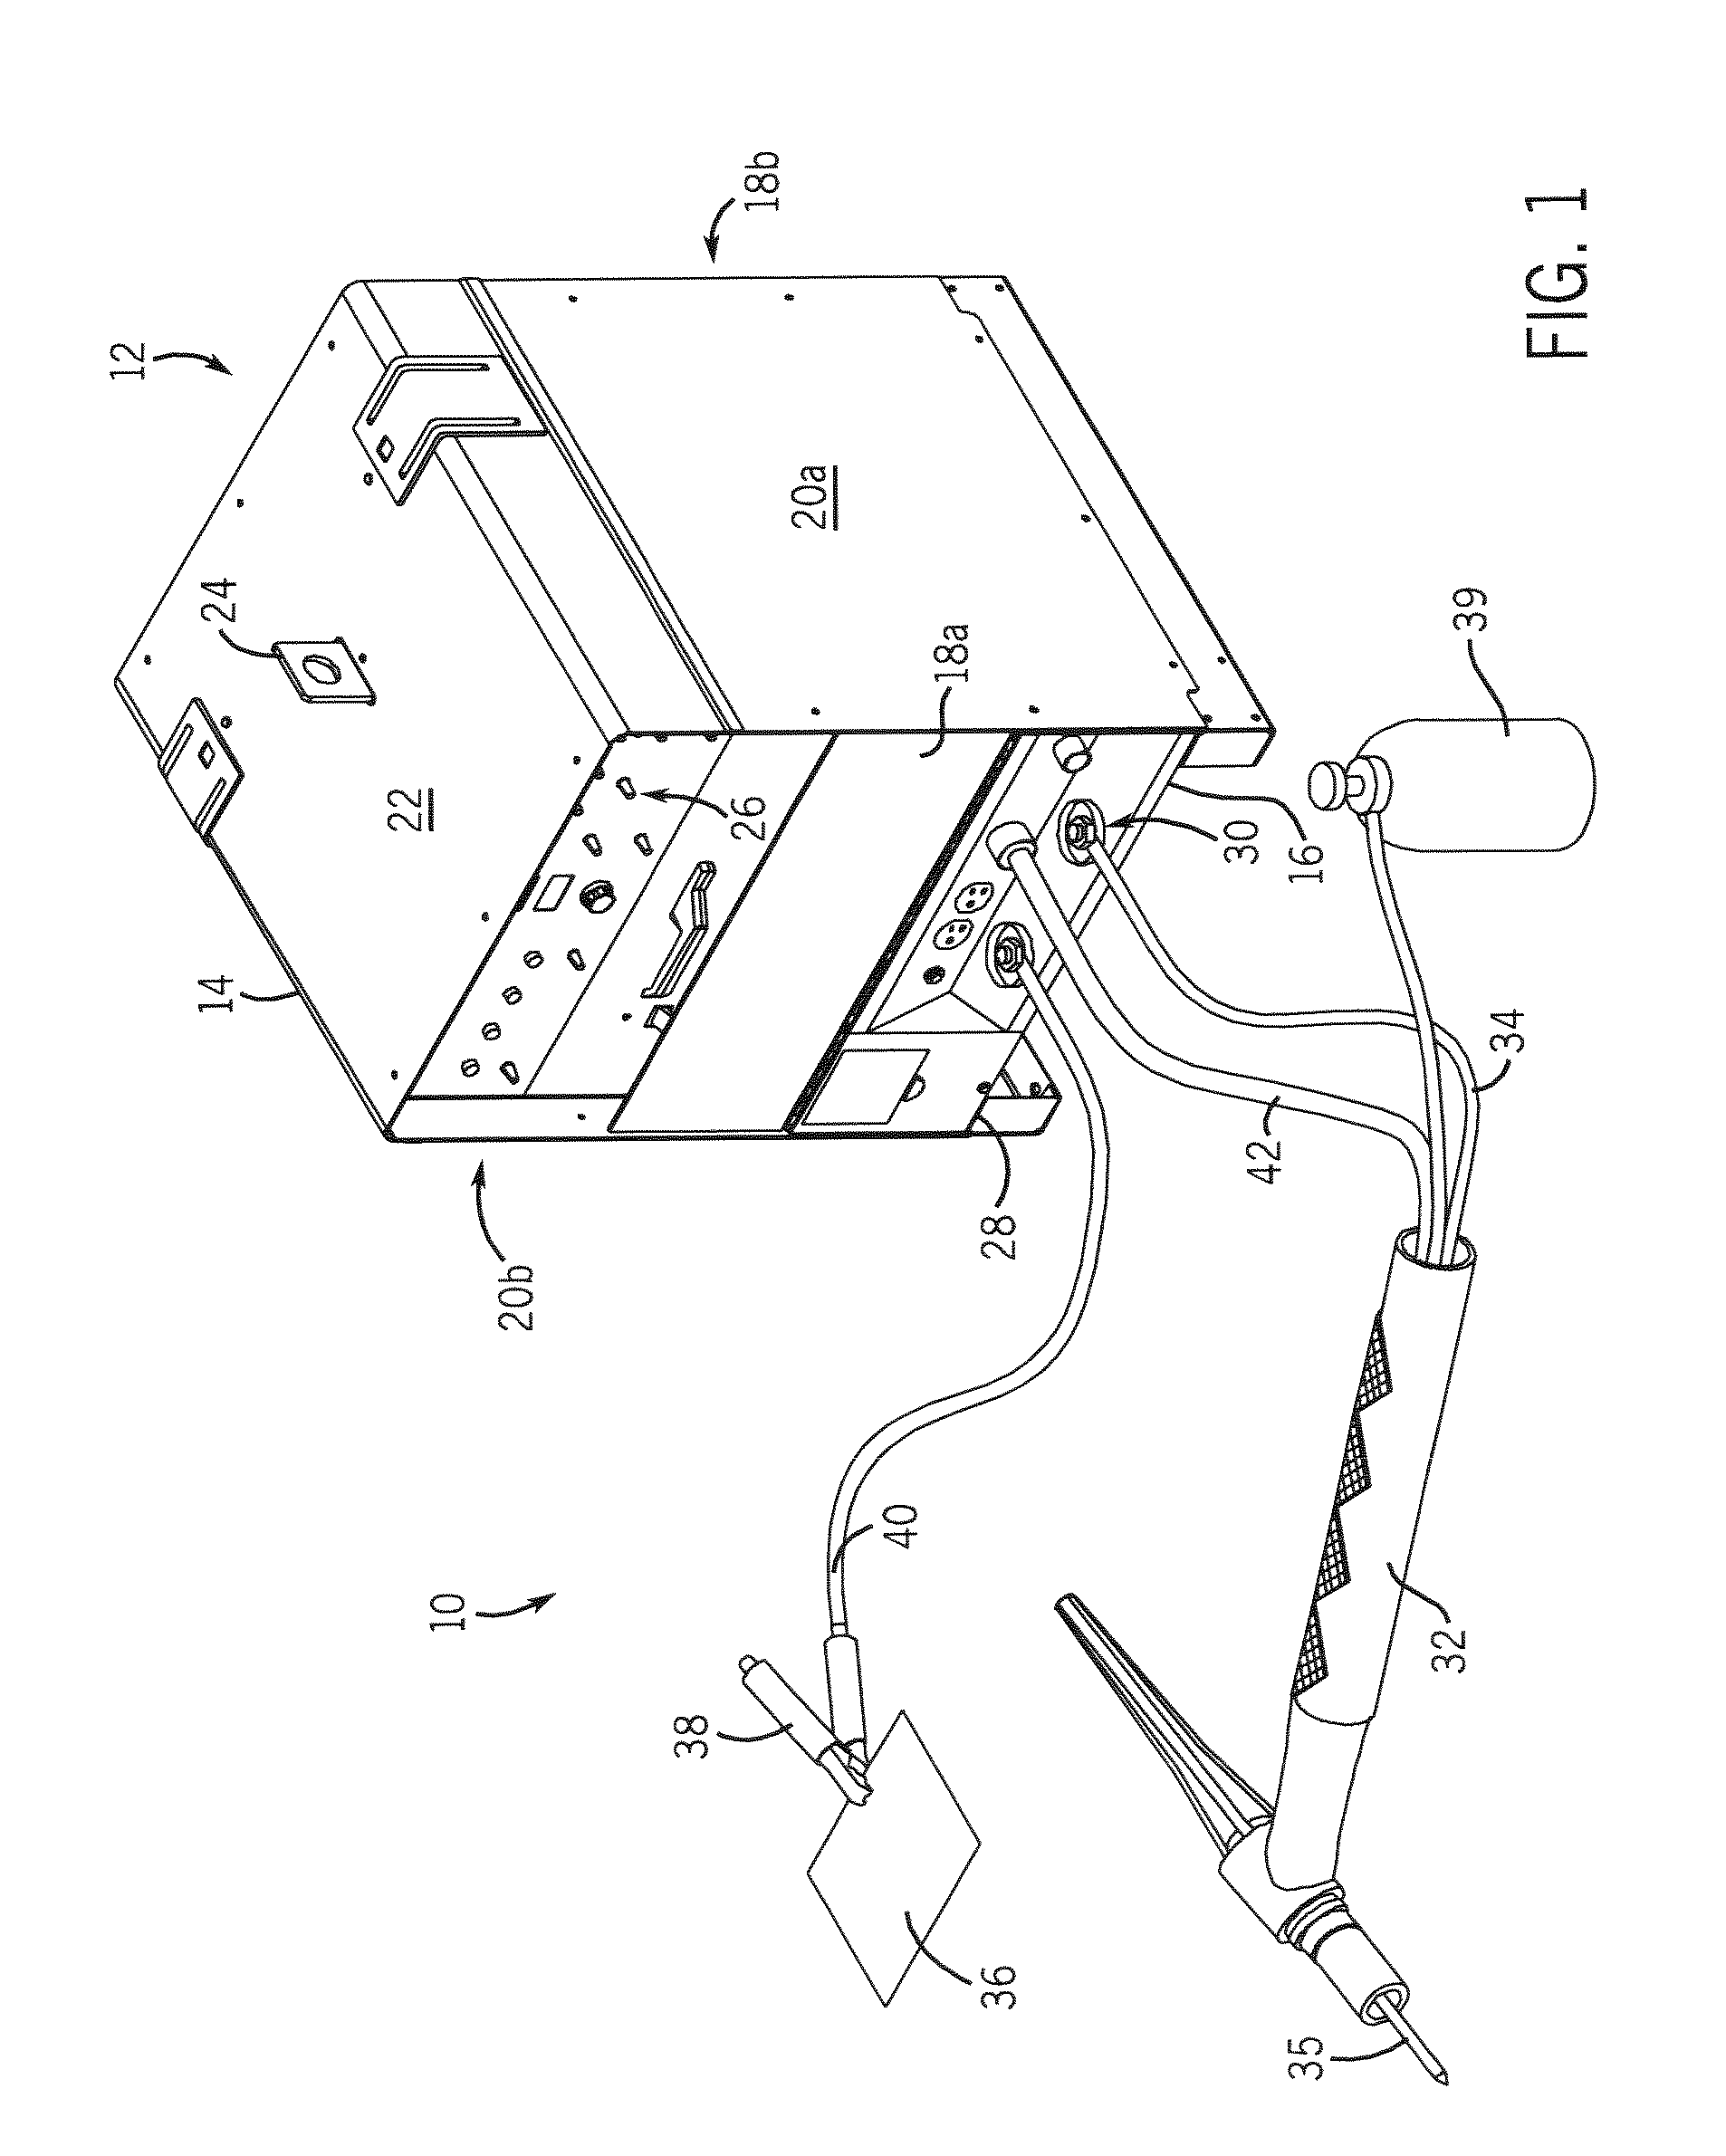 Method and apparatus to adaptively cool a welding-type system